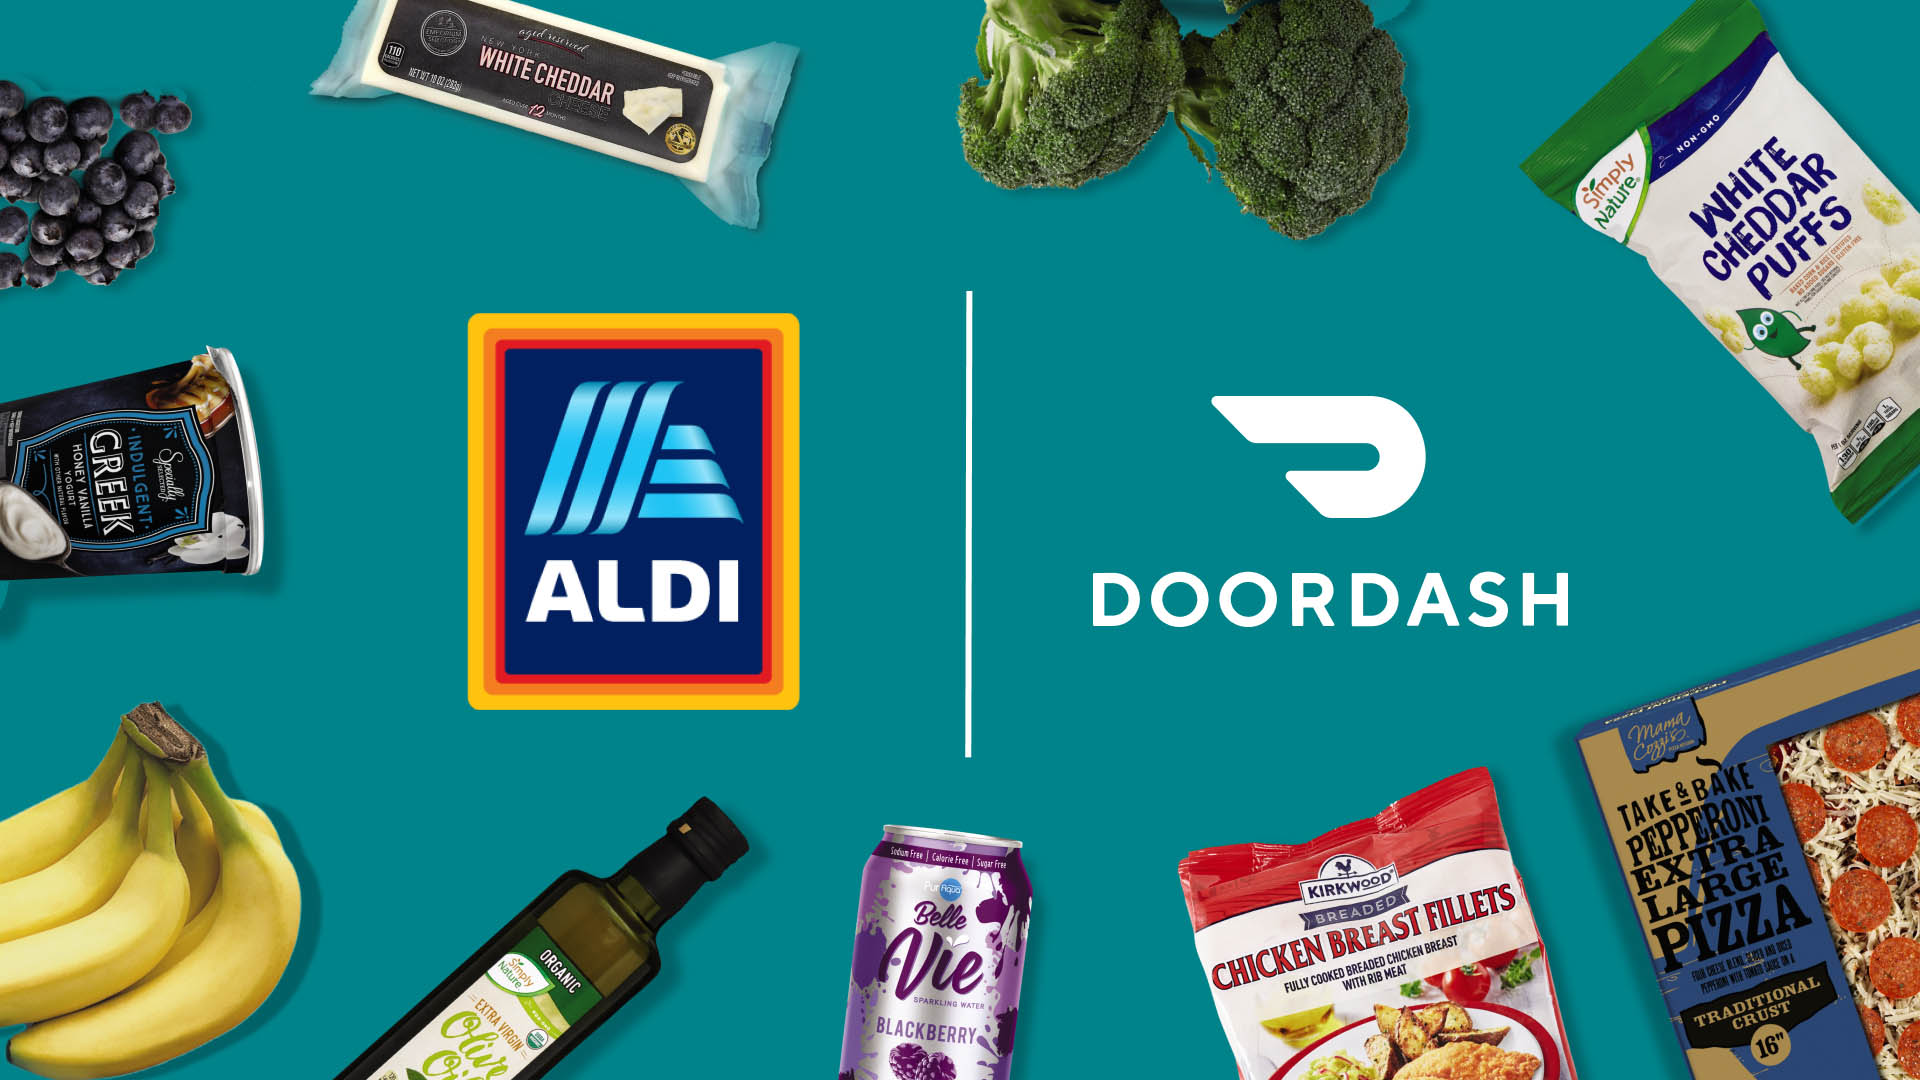 DoorDash Partners with ALDI to Expand OnDemand Grocery Delivery